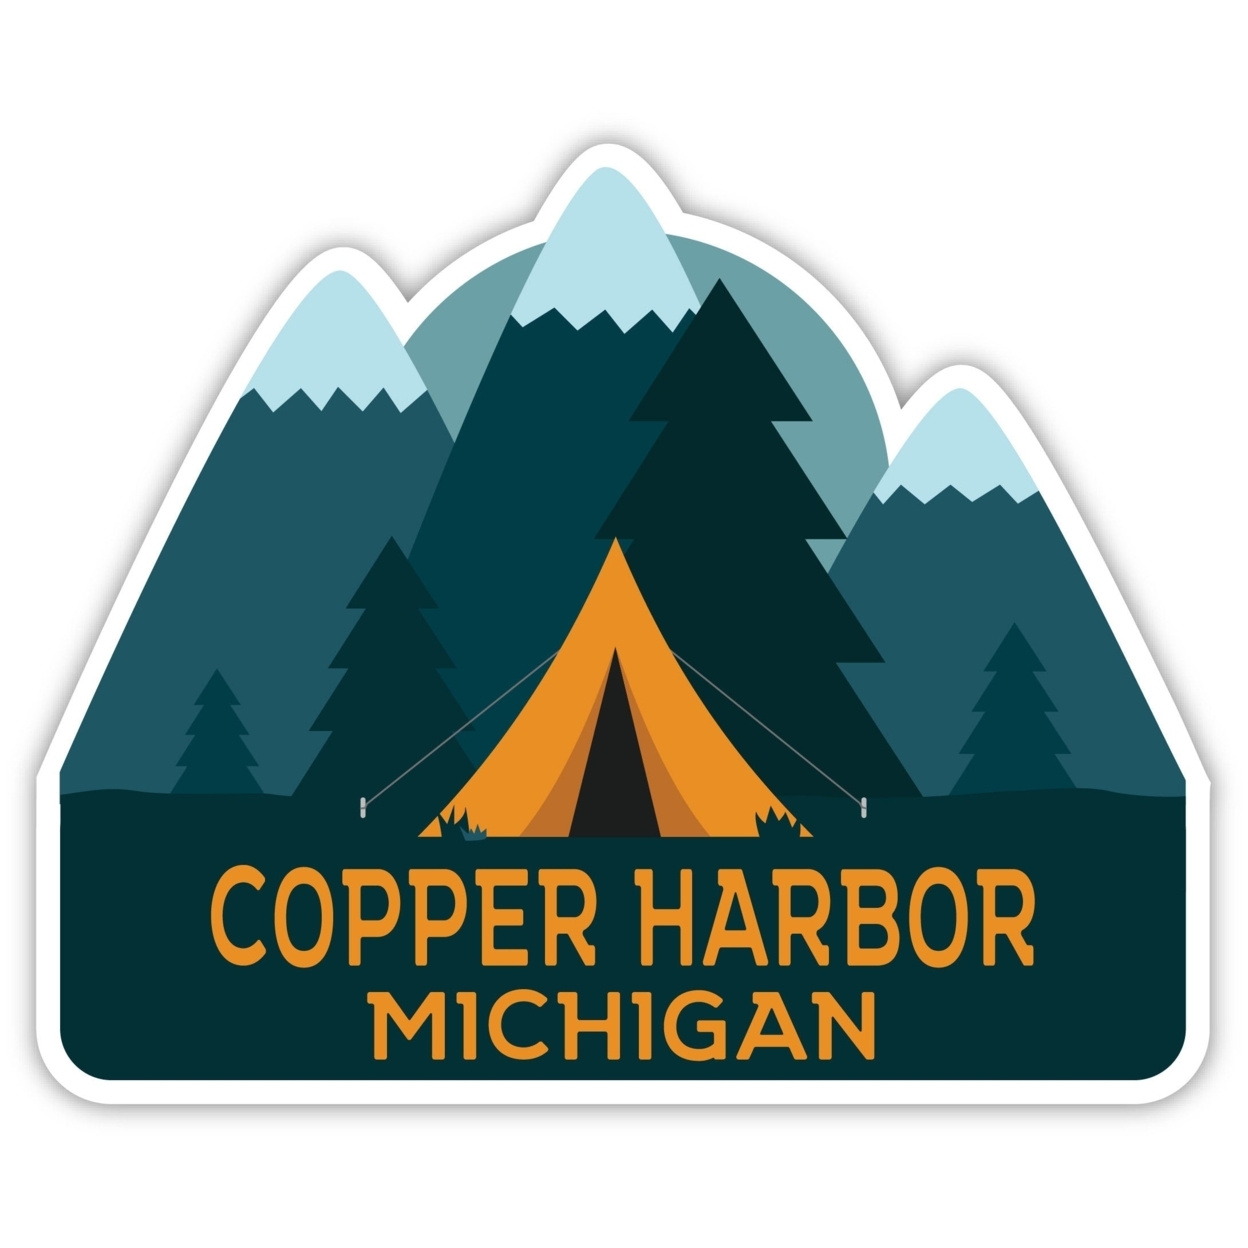 Copper Harbor Michigan Souvenir Decorative Stickers (Choose Theme And Size) - 4-Pack, 6-Inch, Adventures Awaits